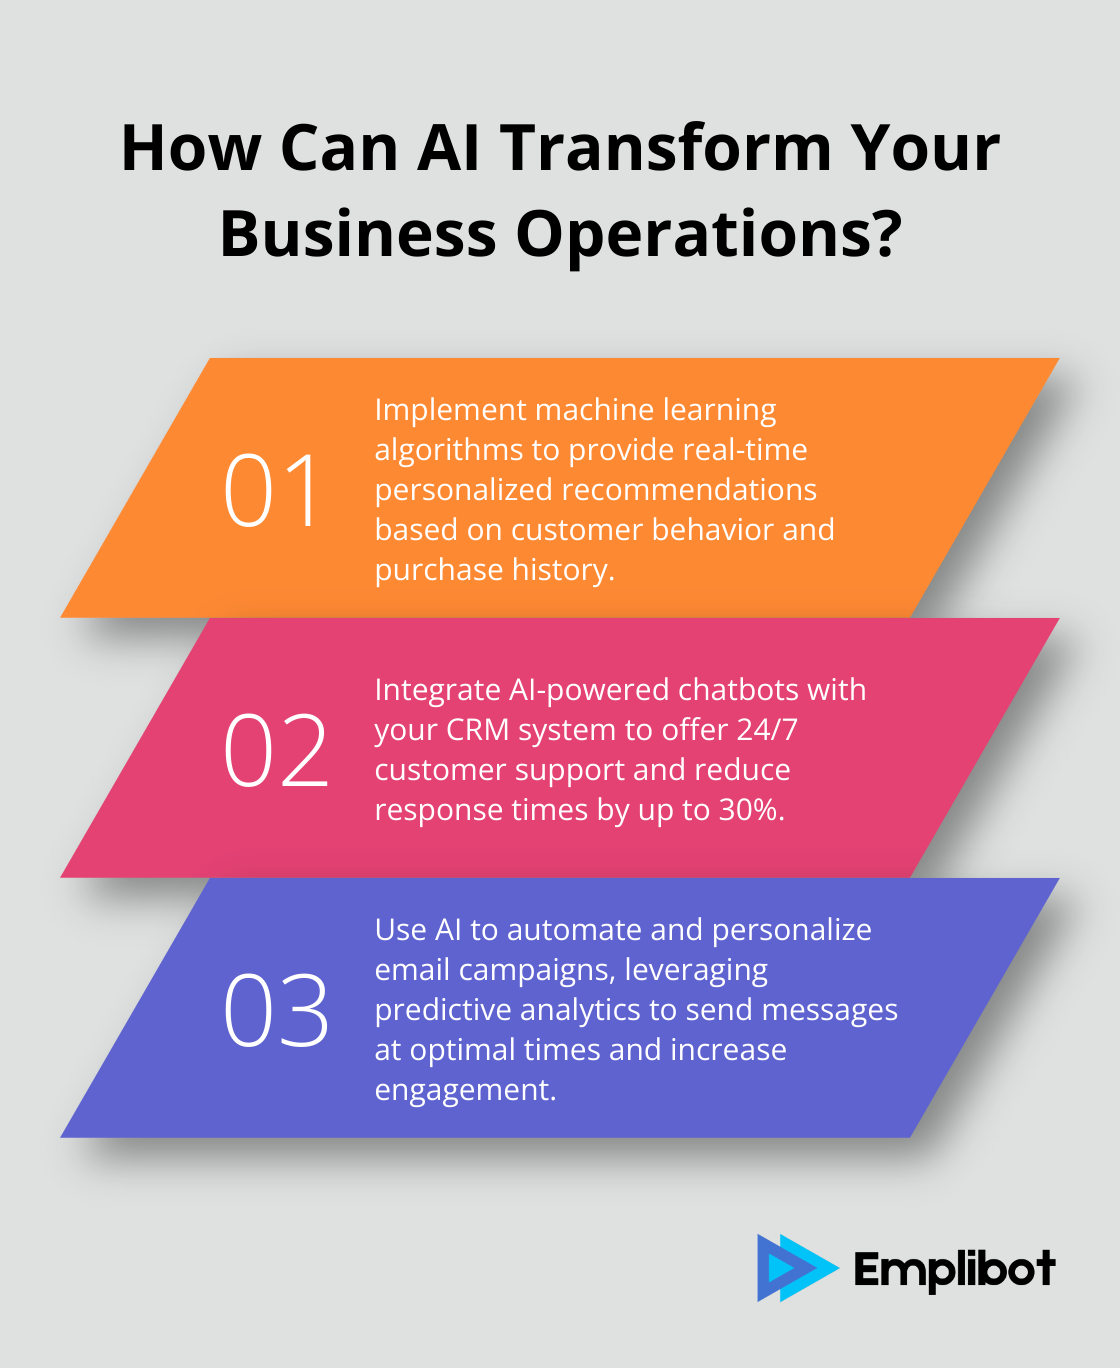 Fact - How Can AI Transform Your Business Operations?